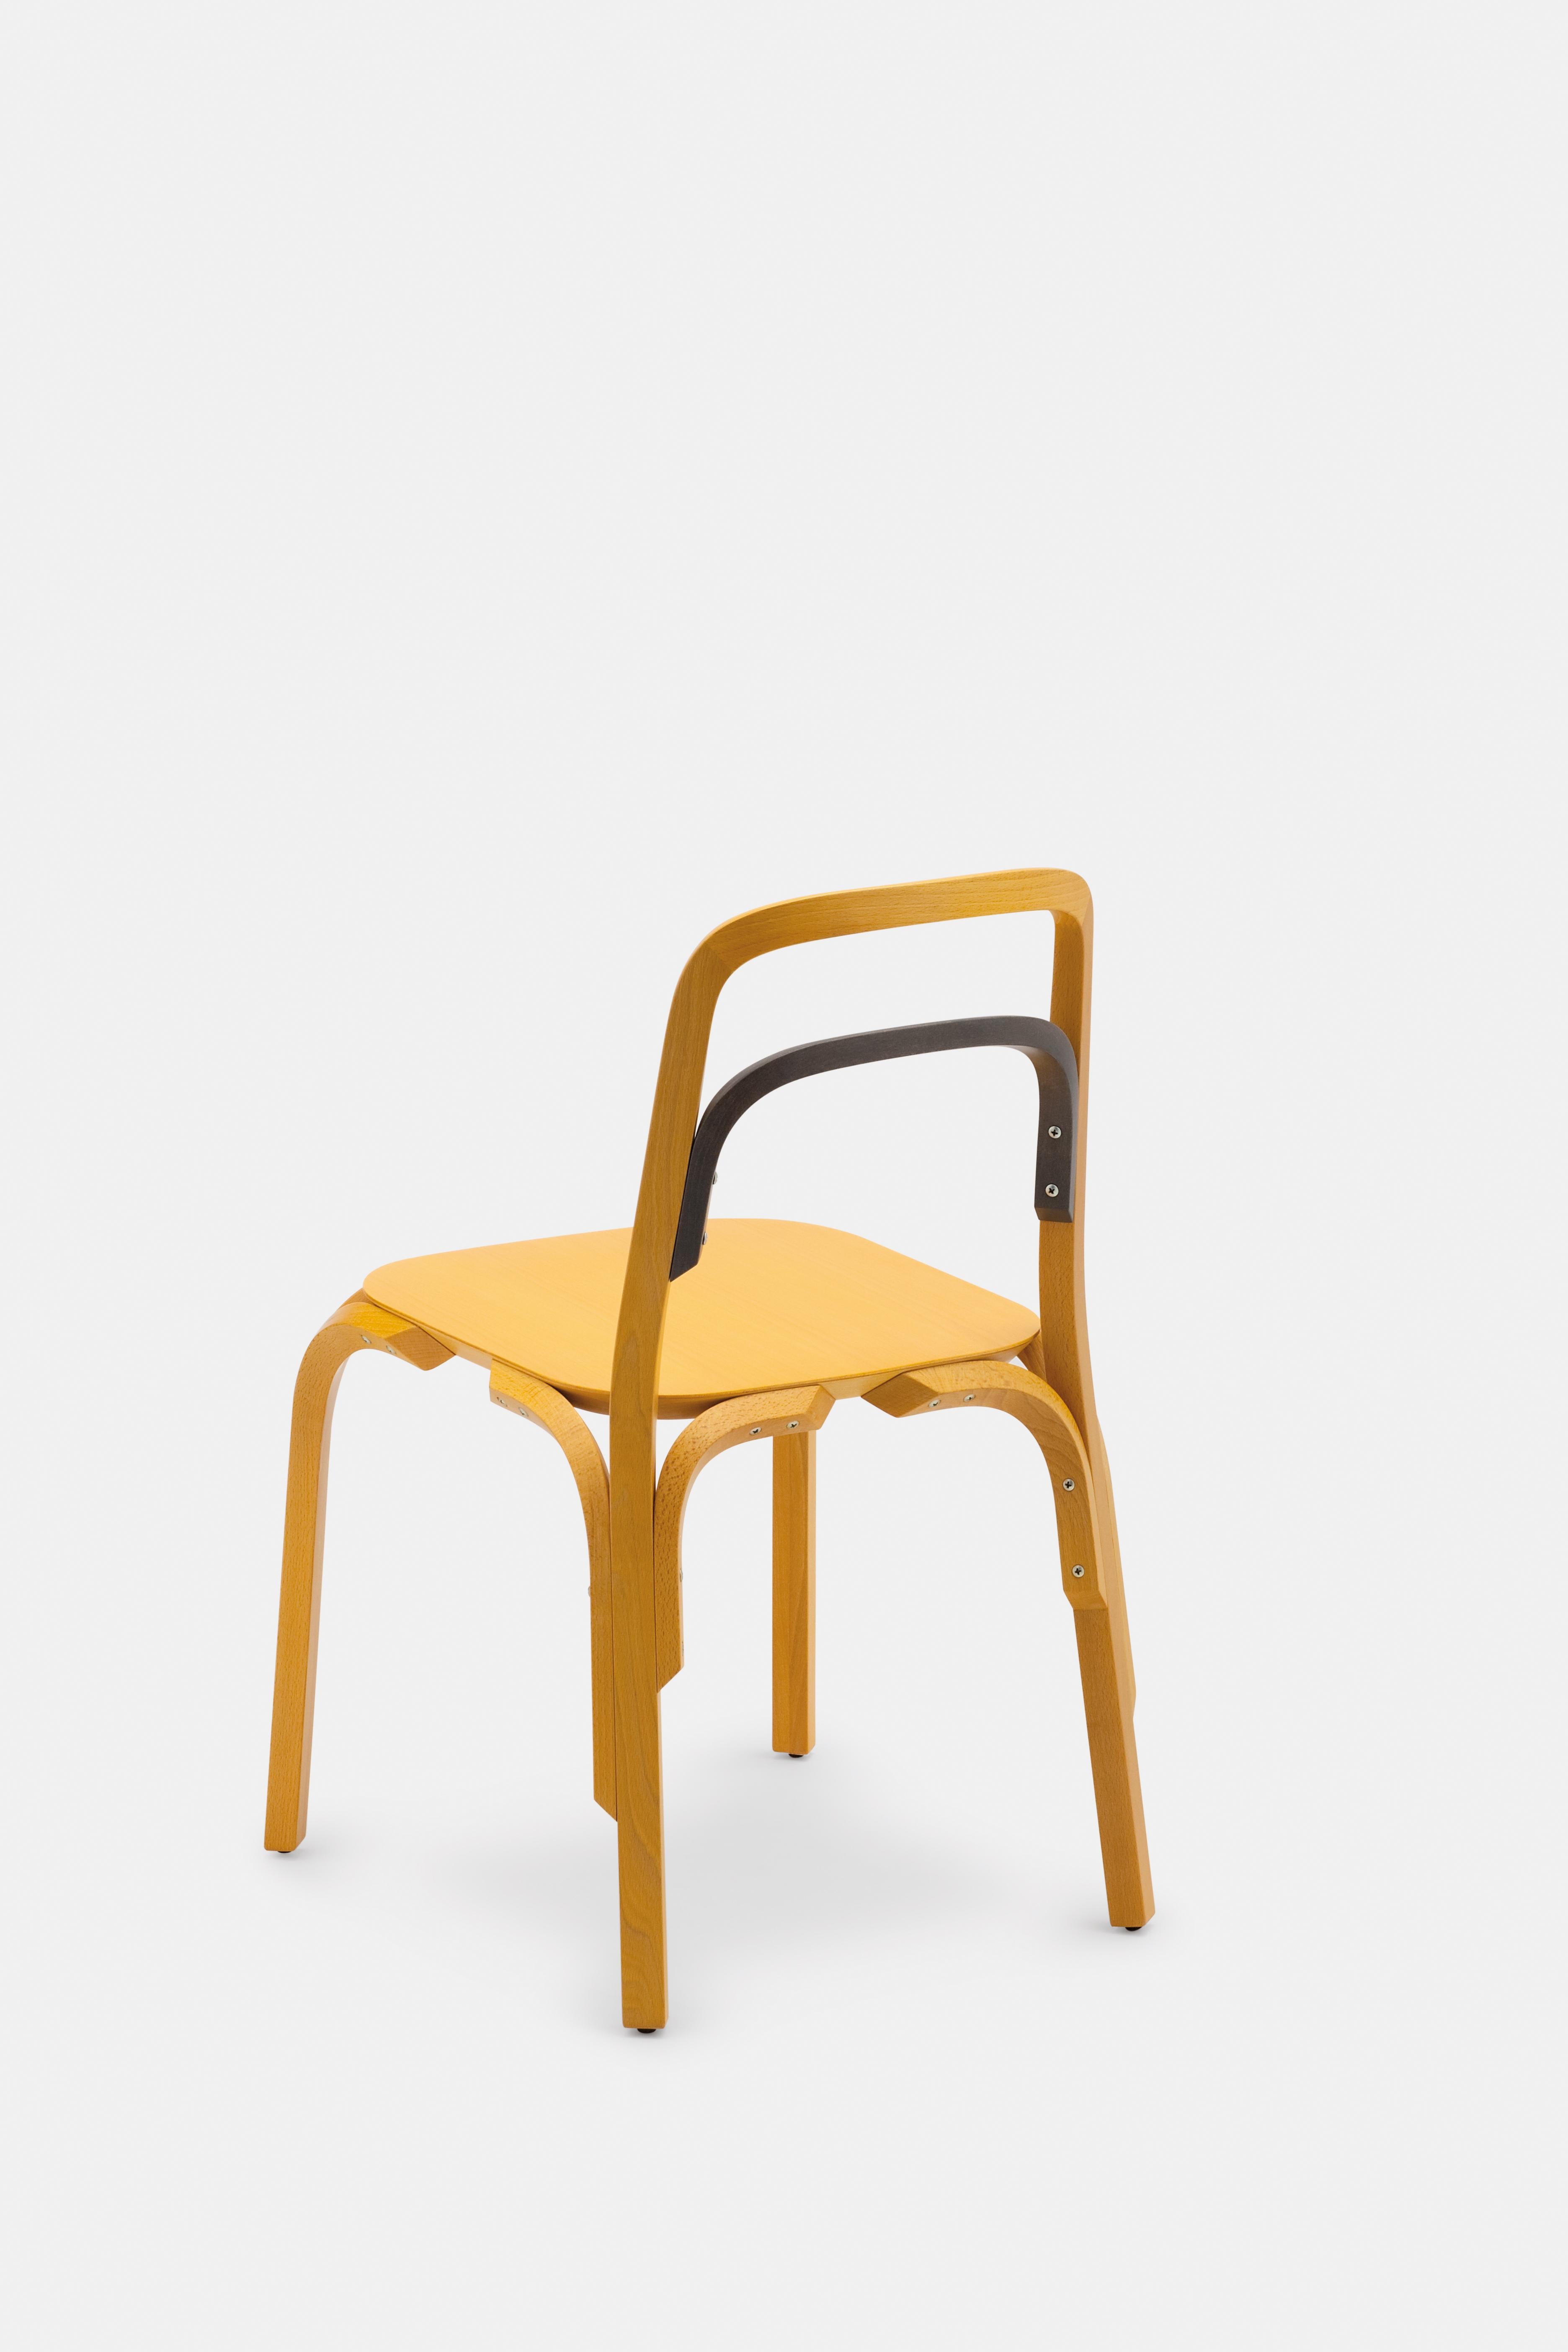 Gamper’s creation of the Sessel chair was driven by a fascination of the traditional bentwood archetype and the way in which its industrialised production has been mastered throughout its 150 yearlong history. Aspiring to create his first production